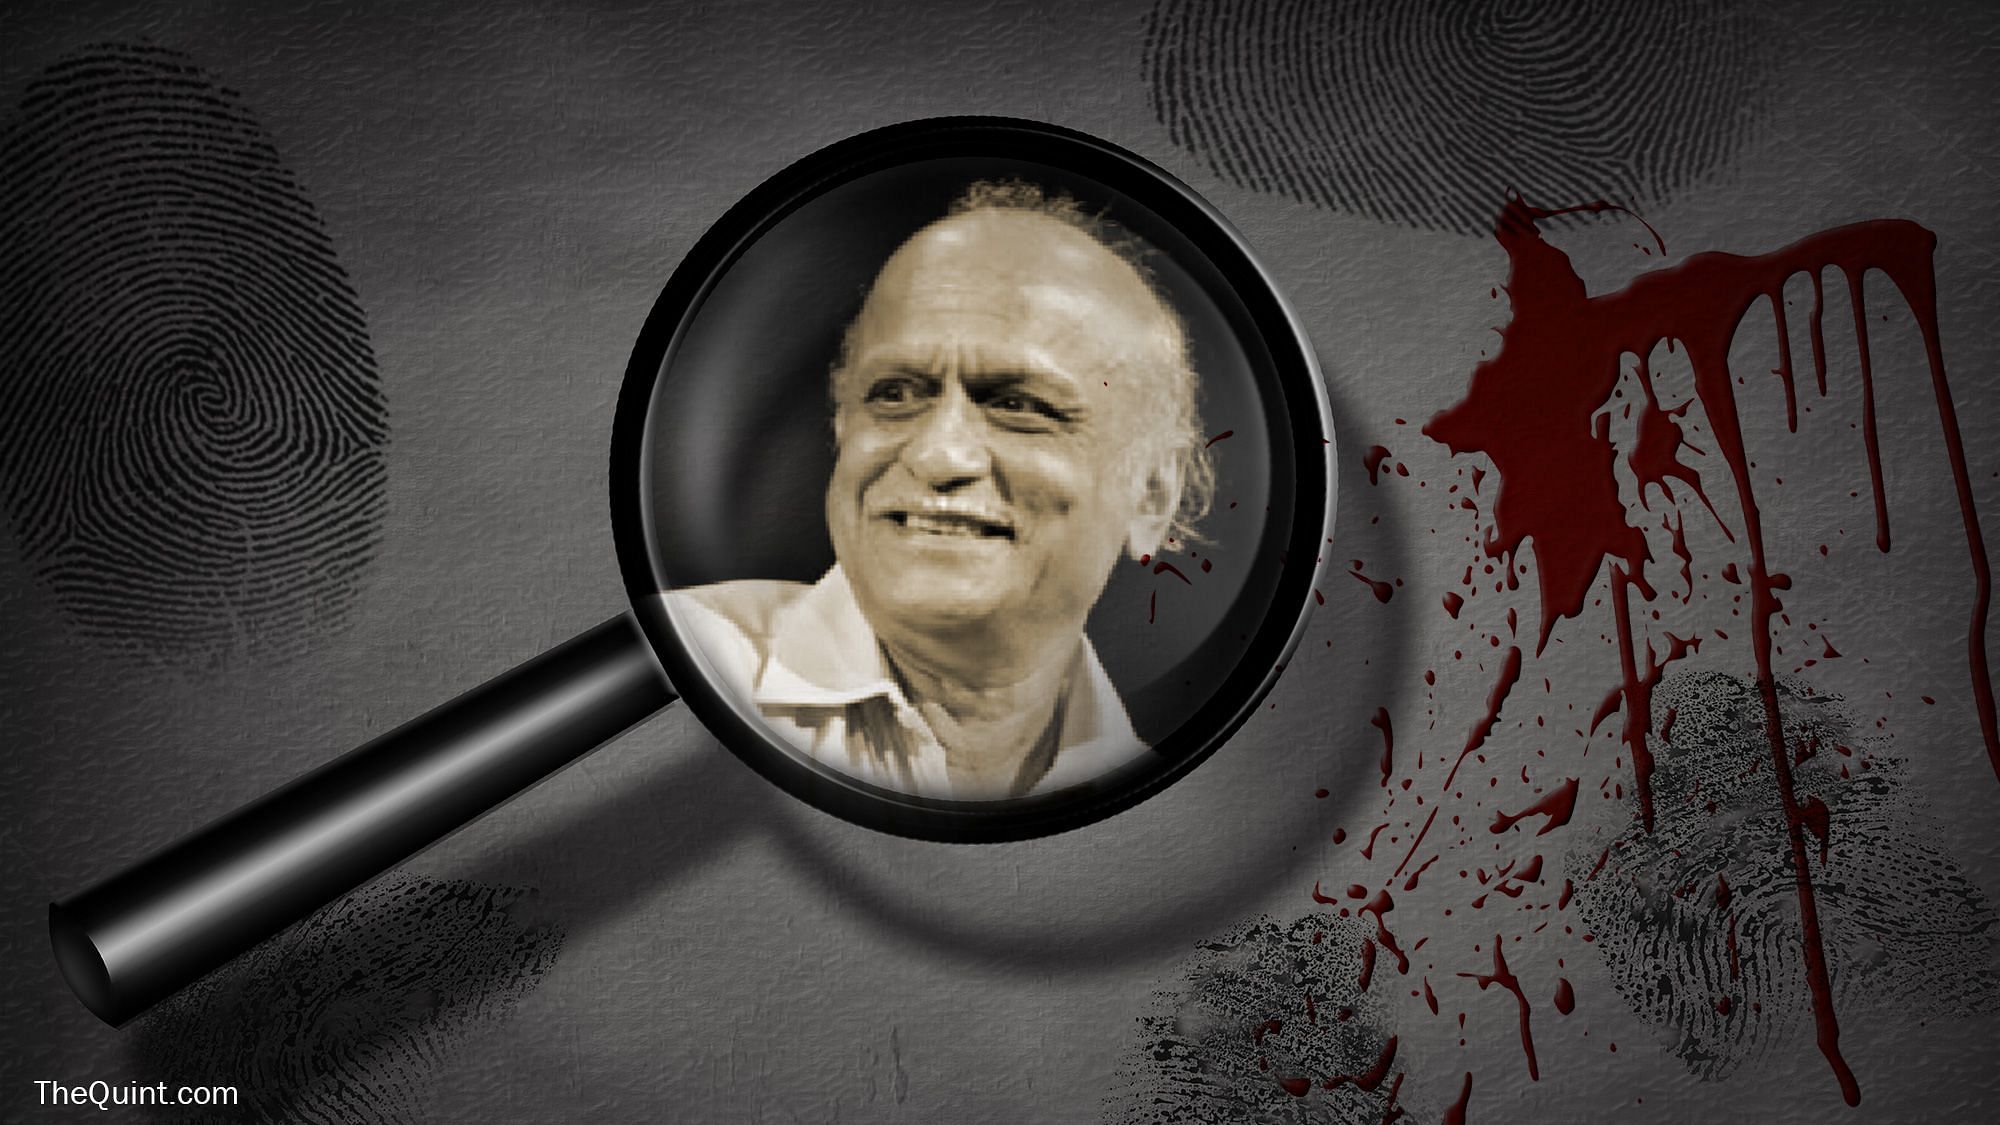 On 29 August 2015, MM Kalburgi, a social activist and noted Kannada writer, was shot dead at his residence.